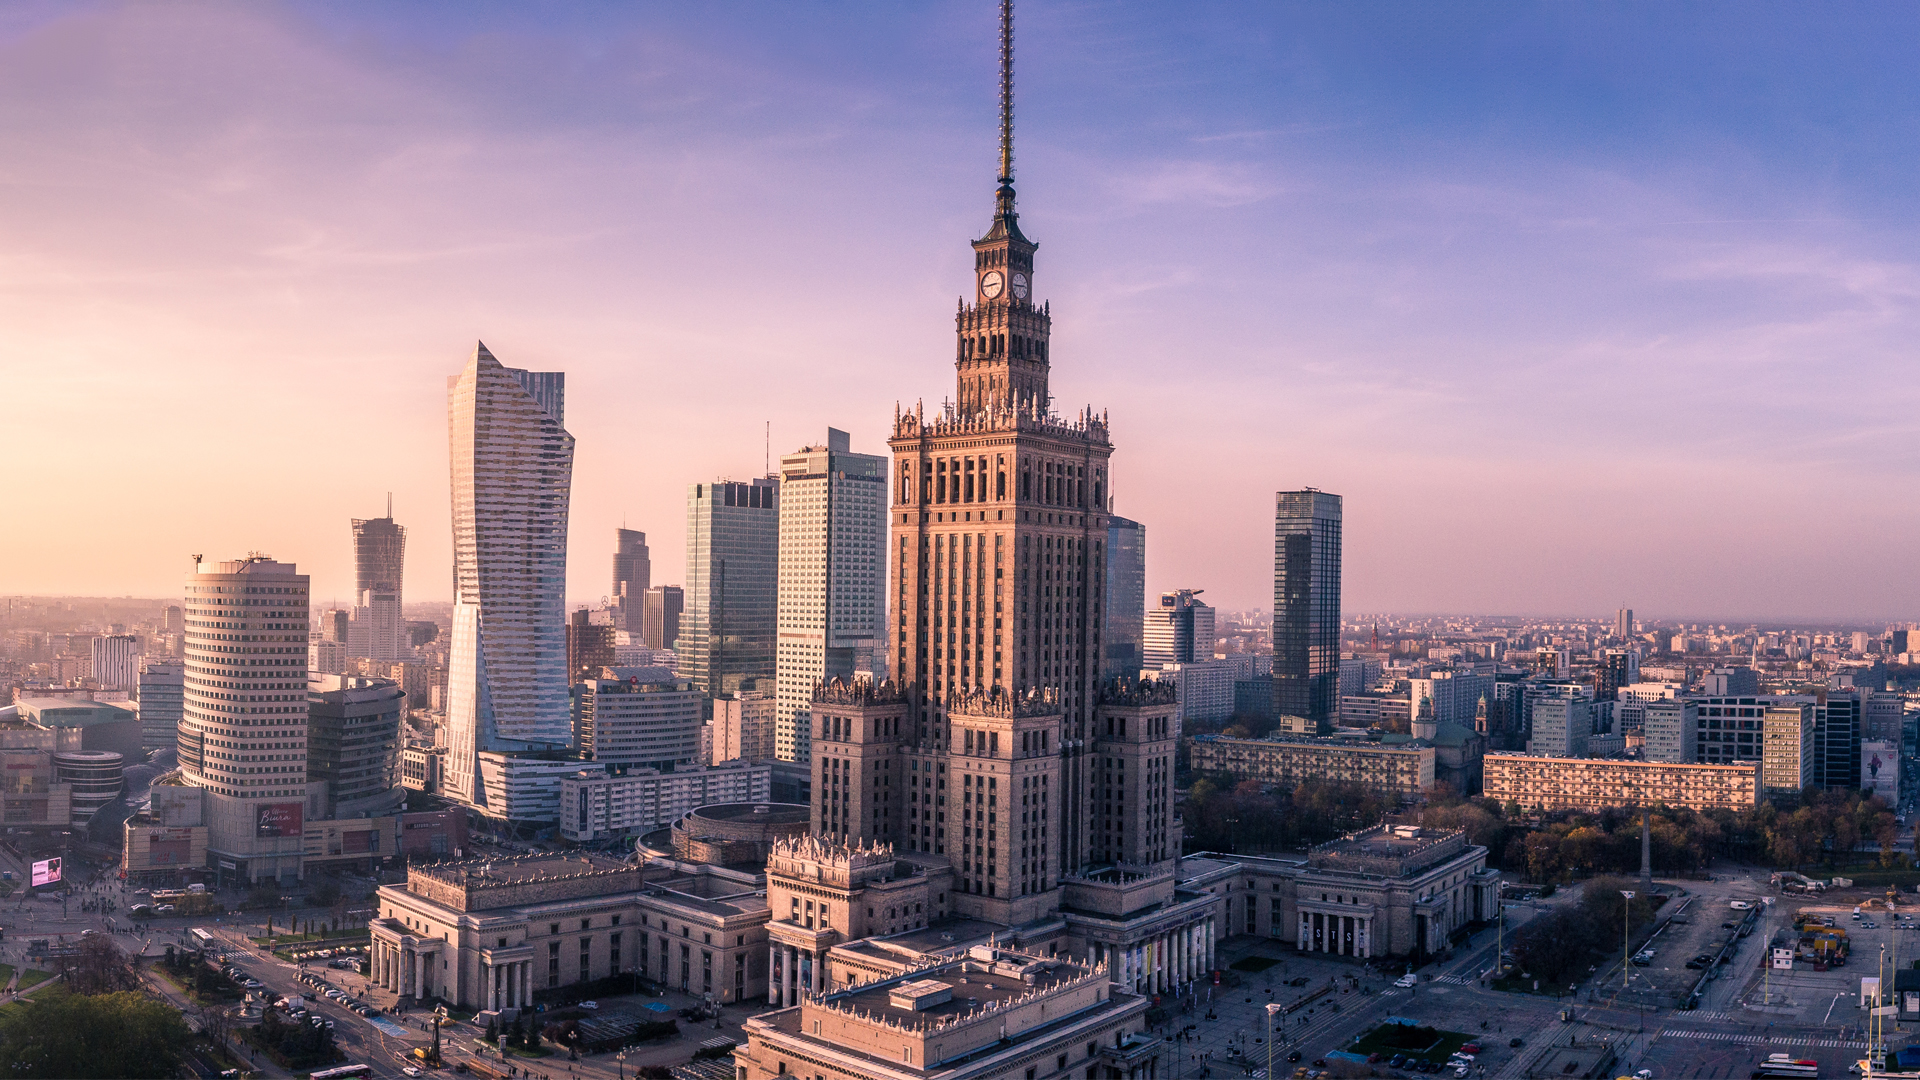 Warsaw from a bird's eye view in the evening image